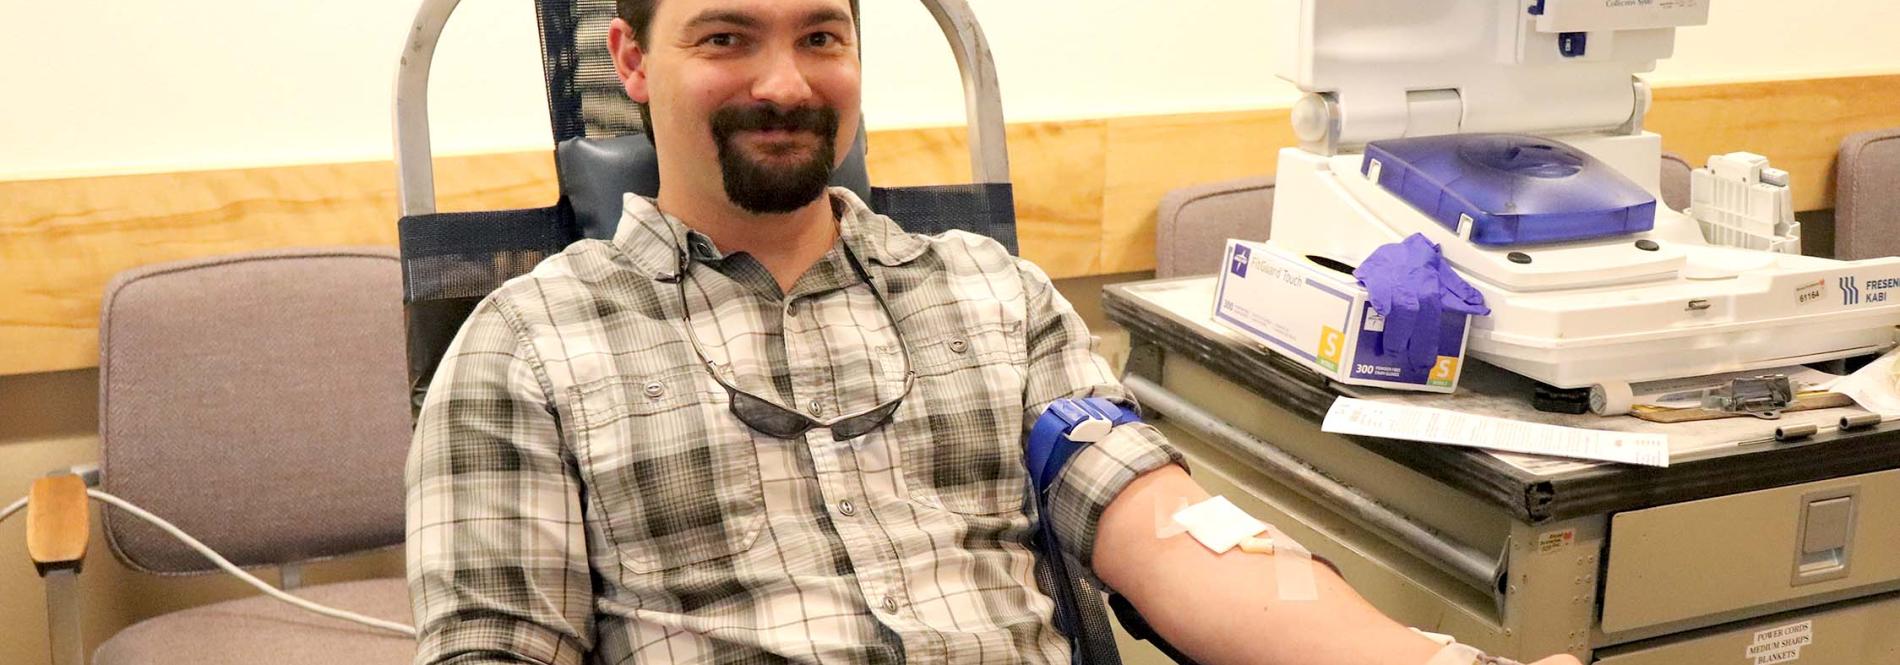 La Plata Electric to host blood drive December 18th